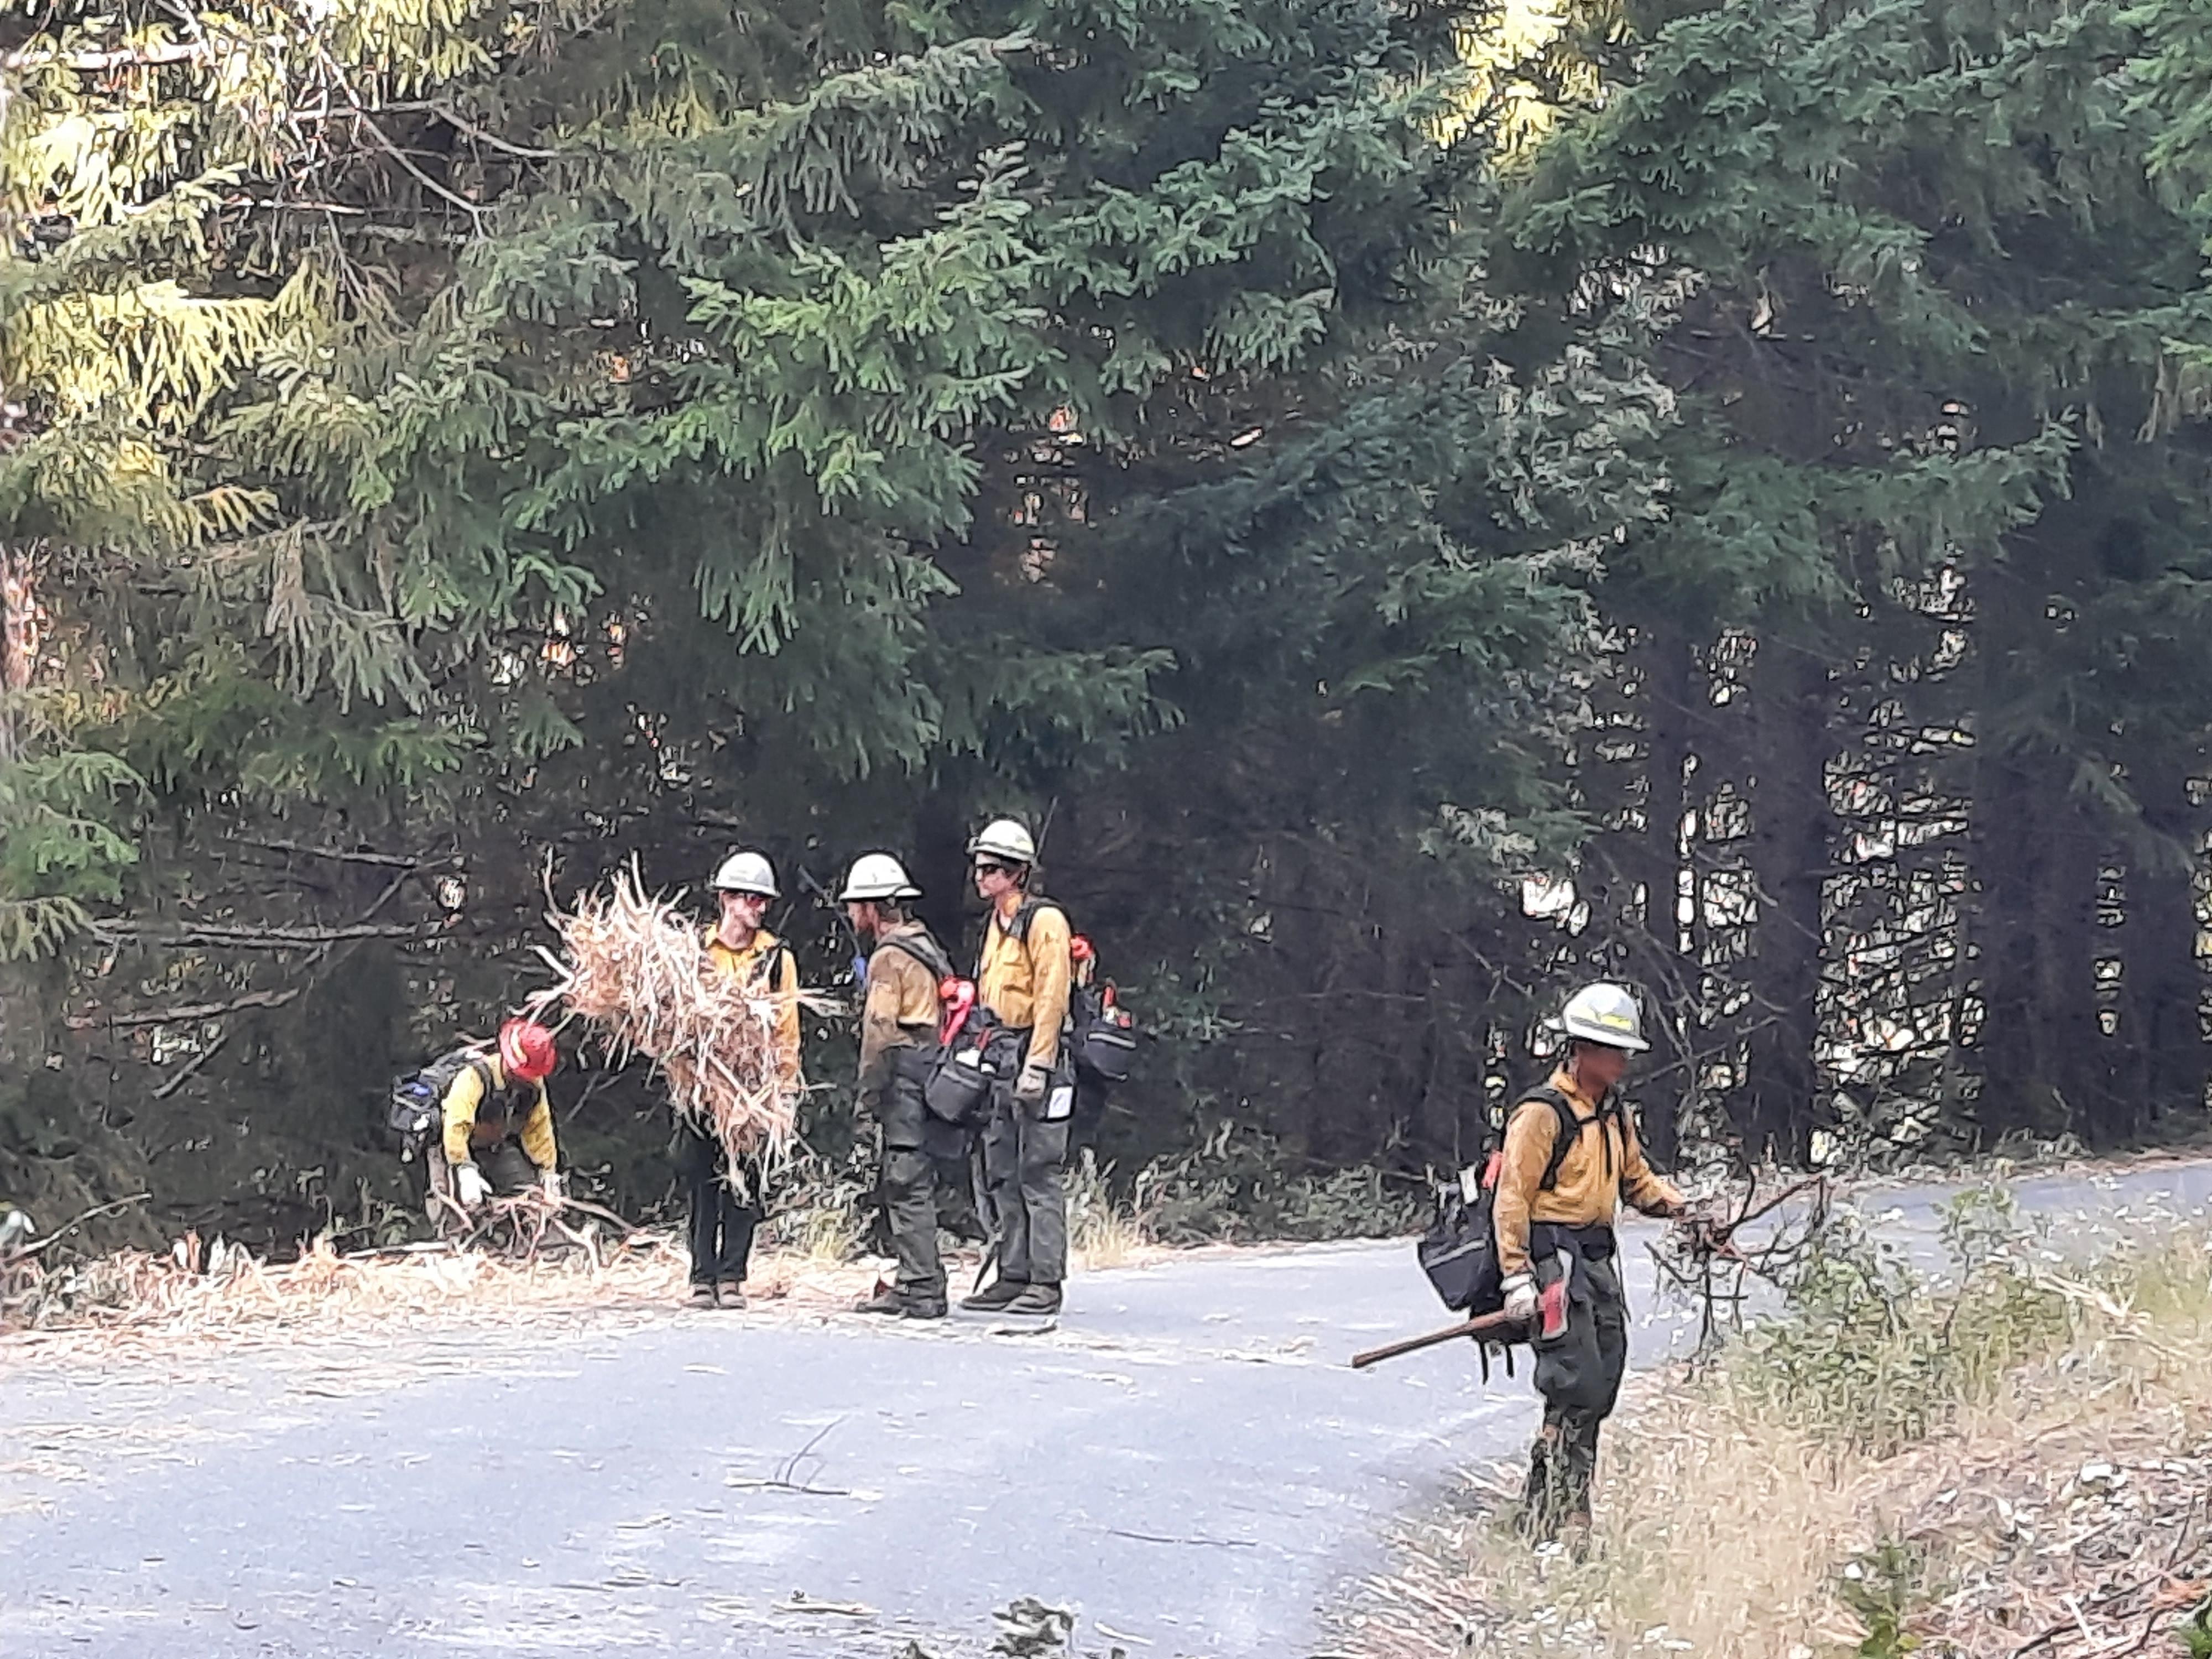 Several individiuals in wildfire gear cut and remove brush along a paved road